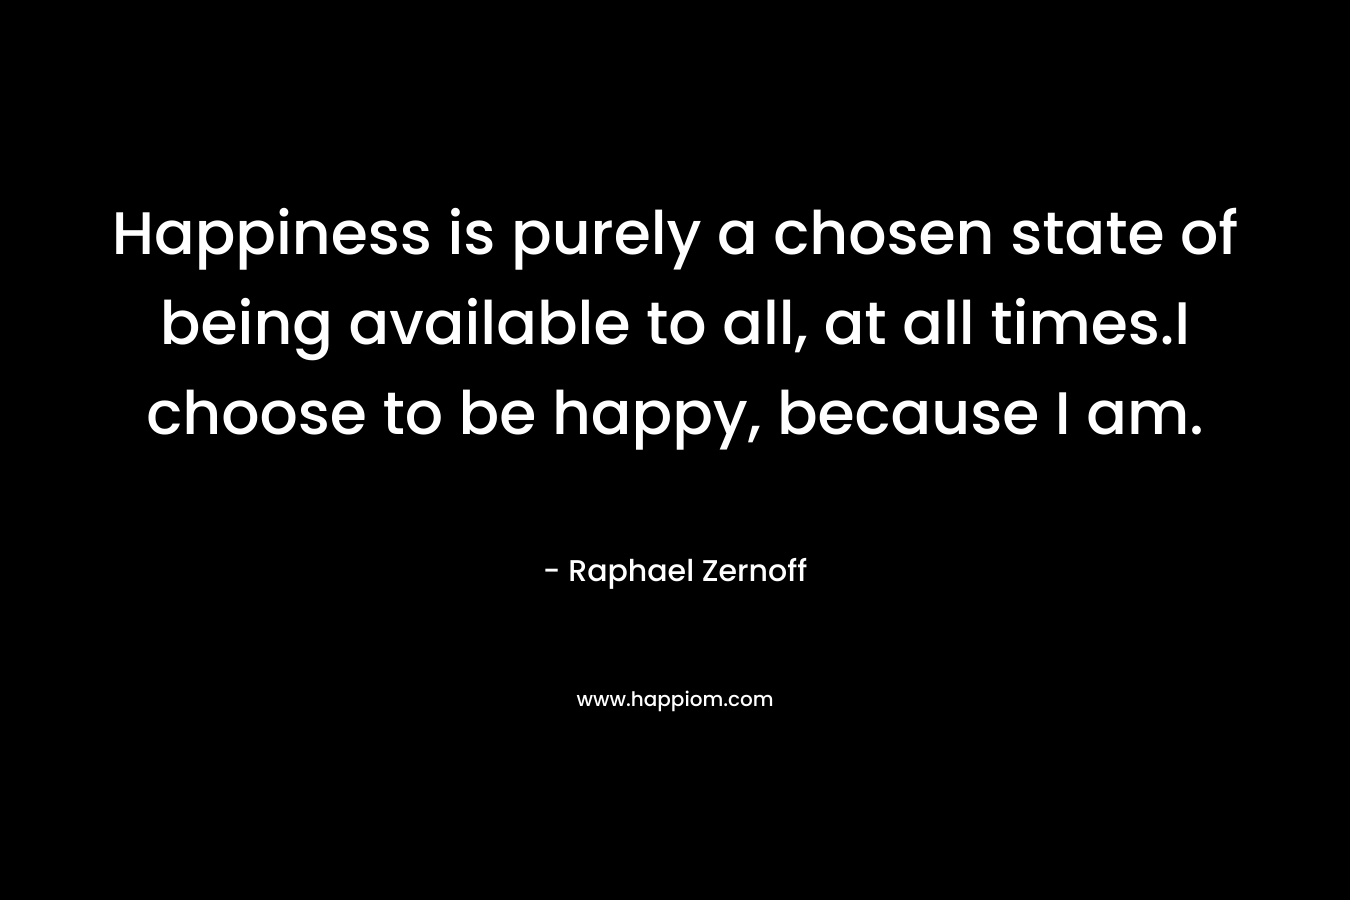 Happiness is purely a chosen state of being available to all, at all times.I choose to be happy, because I am. – Raphael Zernoff